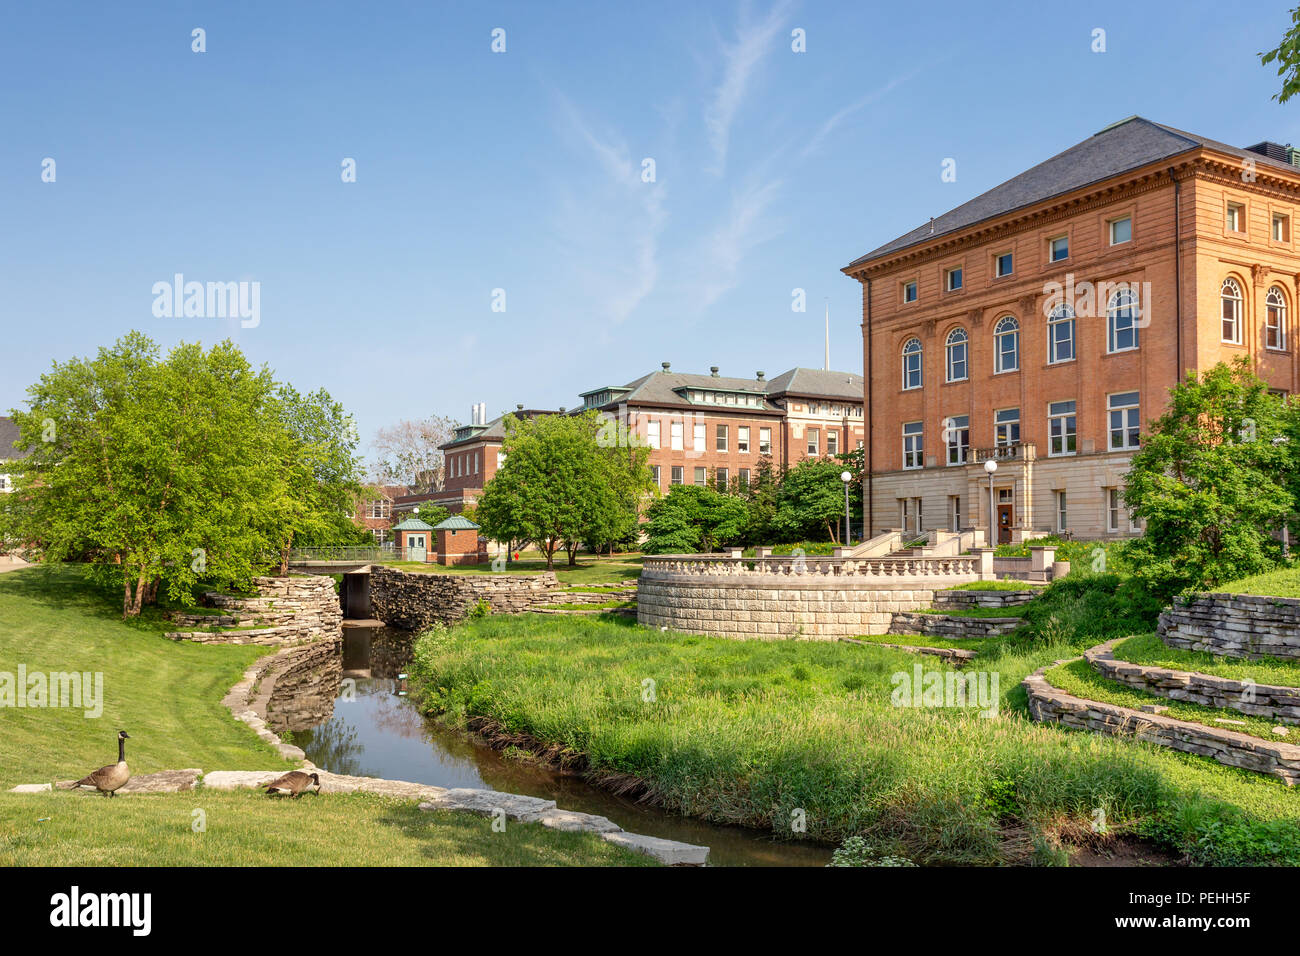 URBANA, IL/USA - JUNE 2, 2018: Boneyard Creek and campus buildings on the campus of the University of Illinois at Urbana–Champaign. Stock Photo